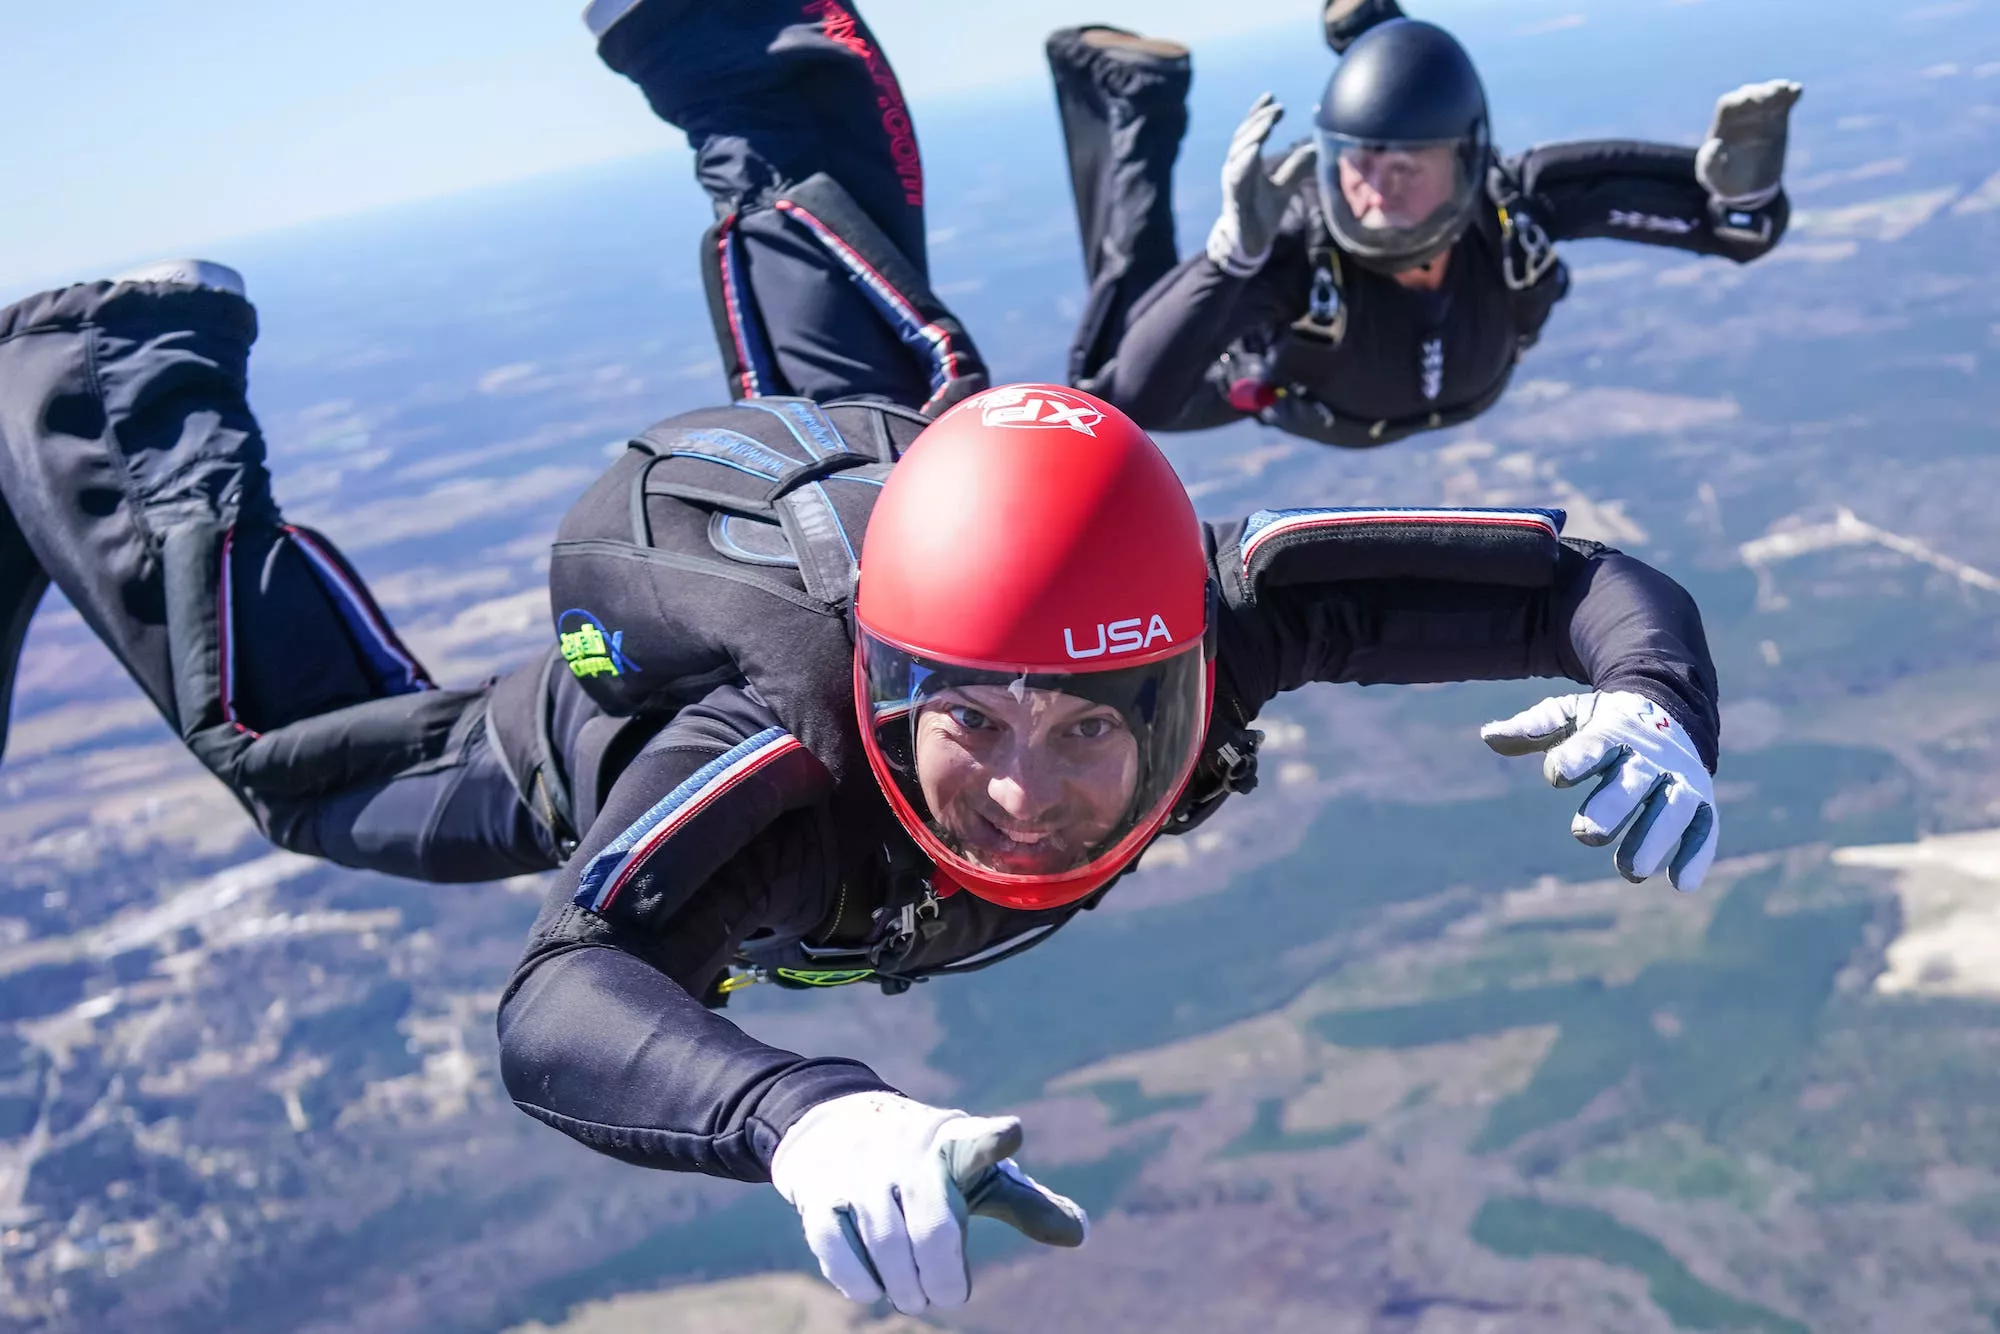 School of Human Flight in USA, North America | Skydiving - Rated 1